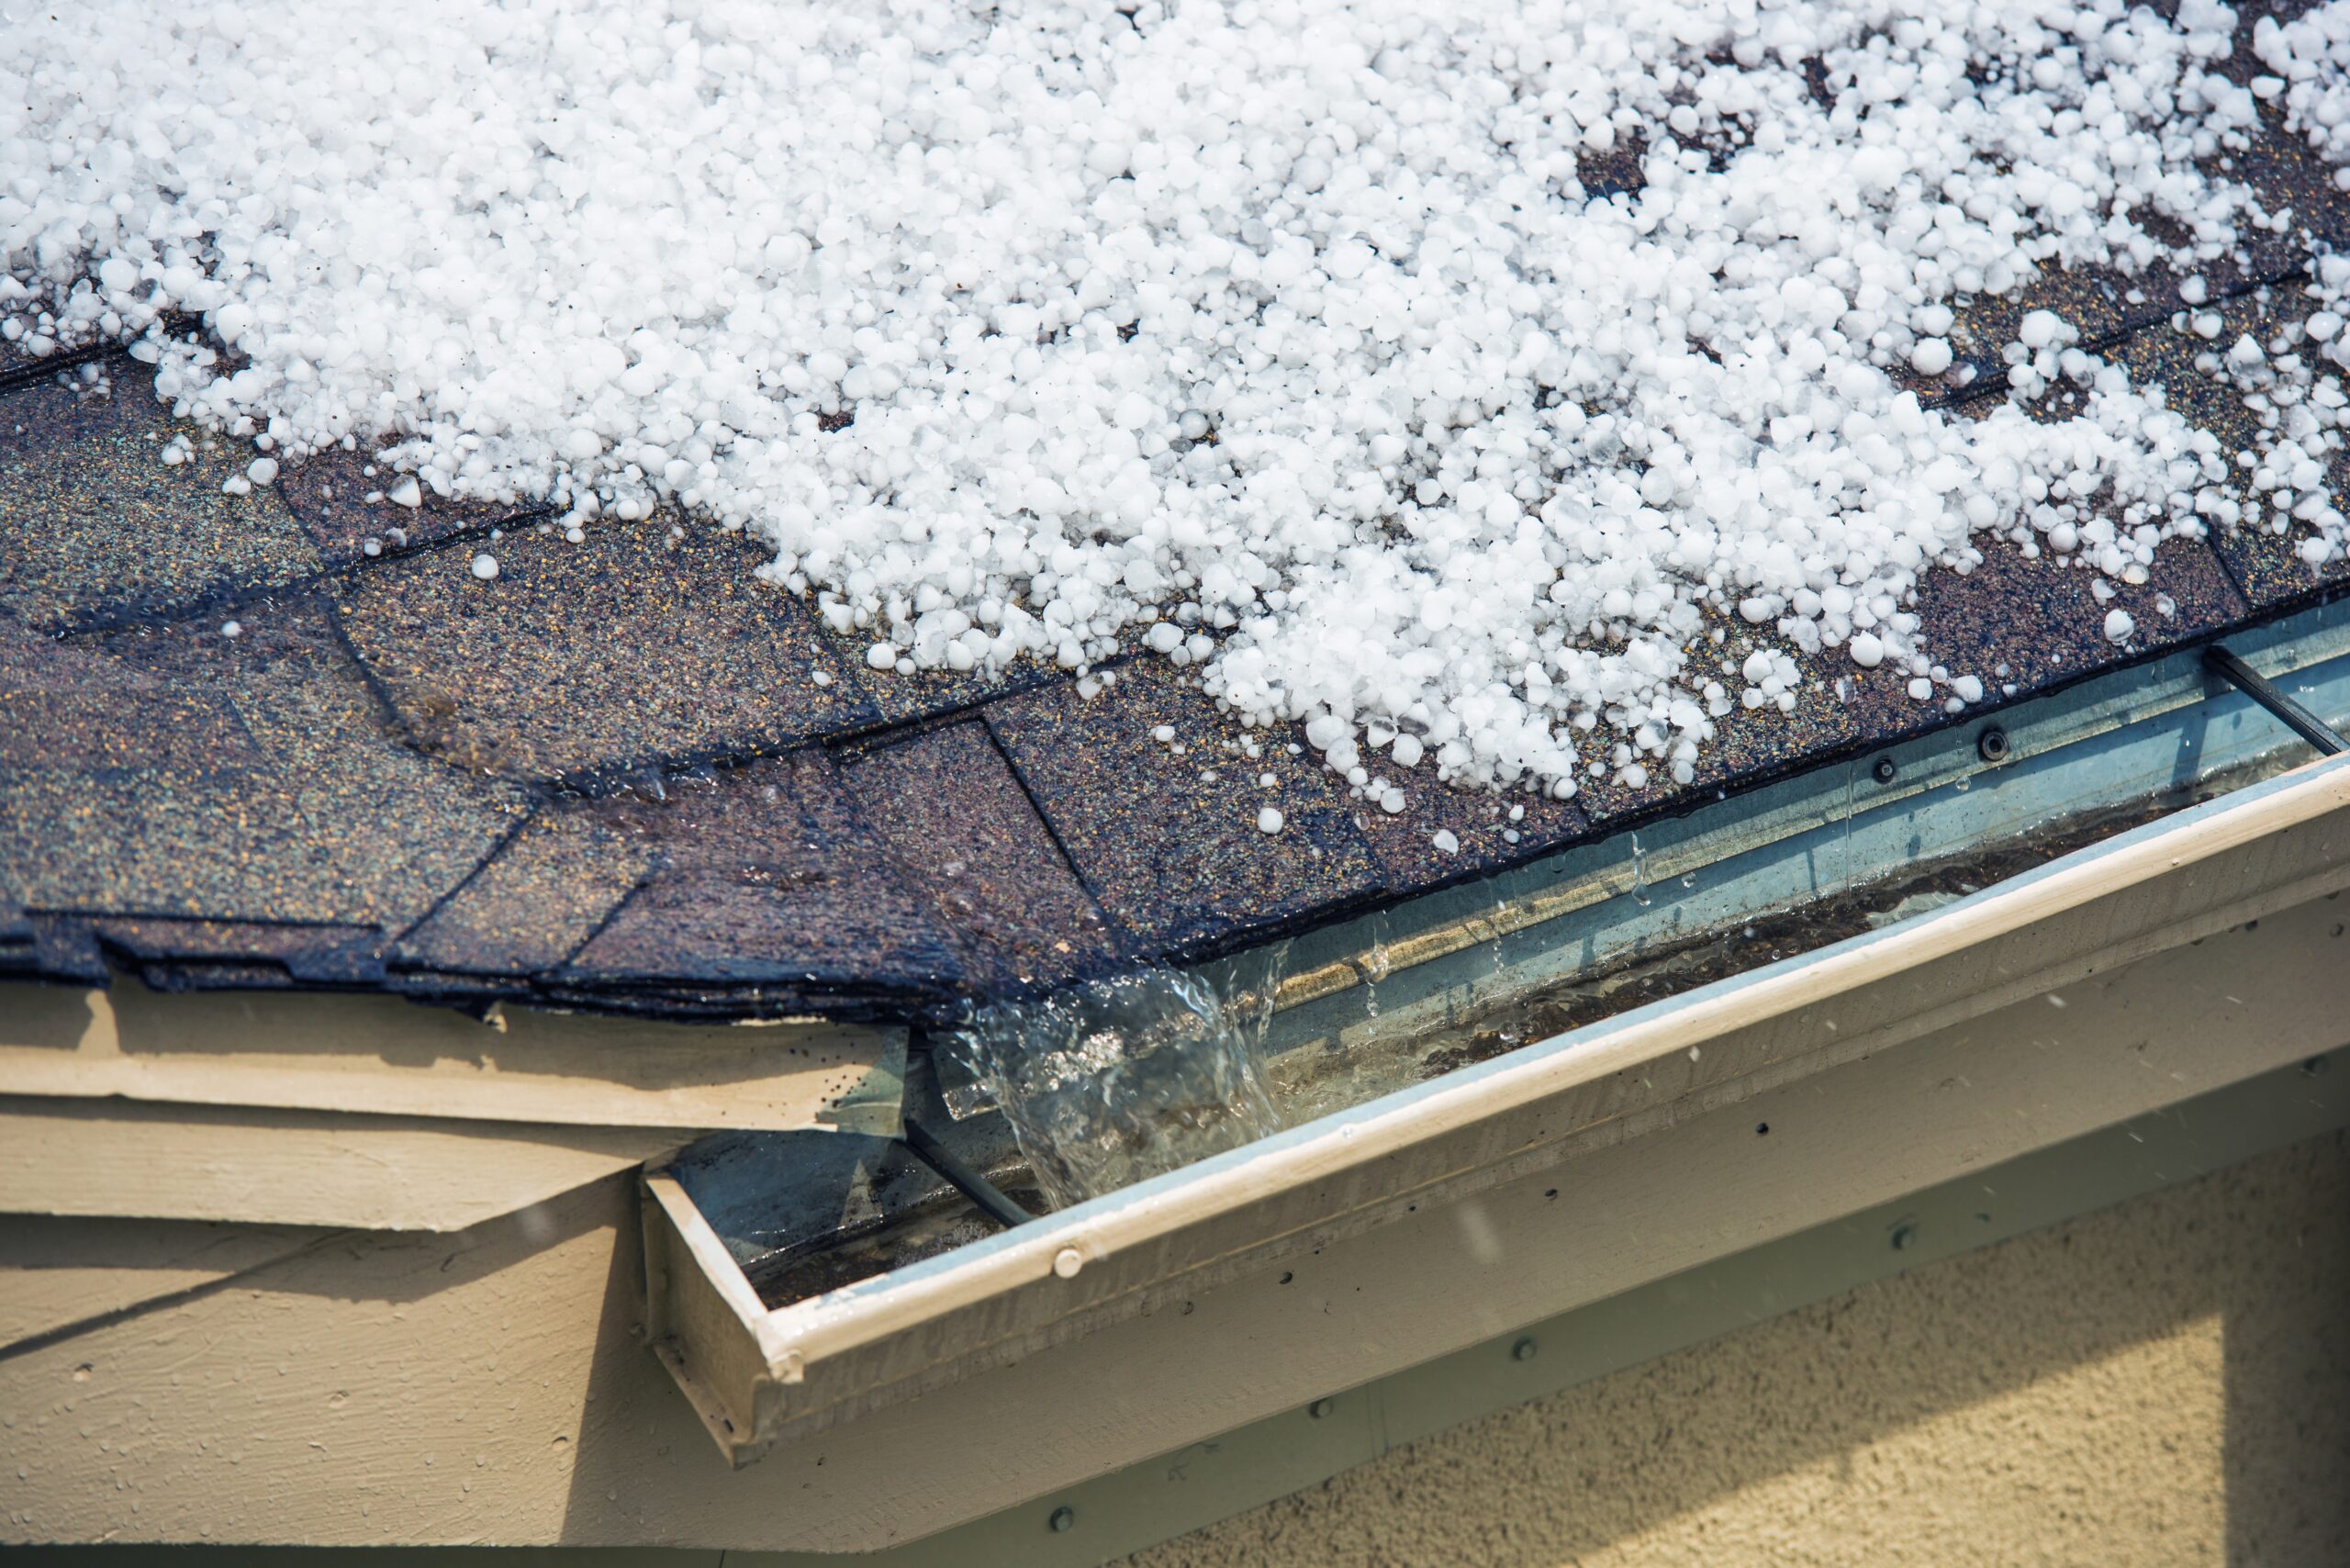 Accumulation of hailstones on a shingle roof, partially filling a gutter, with sunlight casting a glow on the icy white pellets, indicative of a recent hail event.